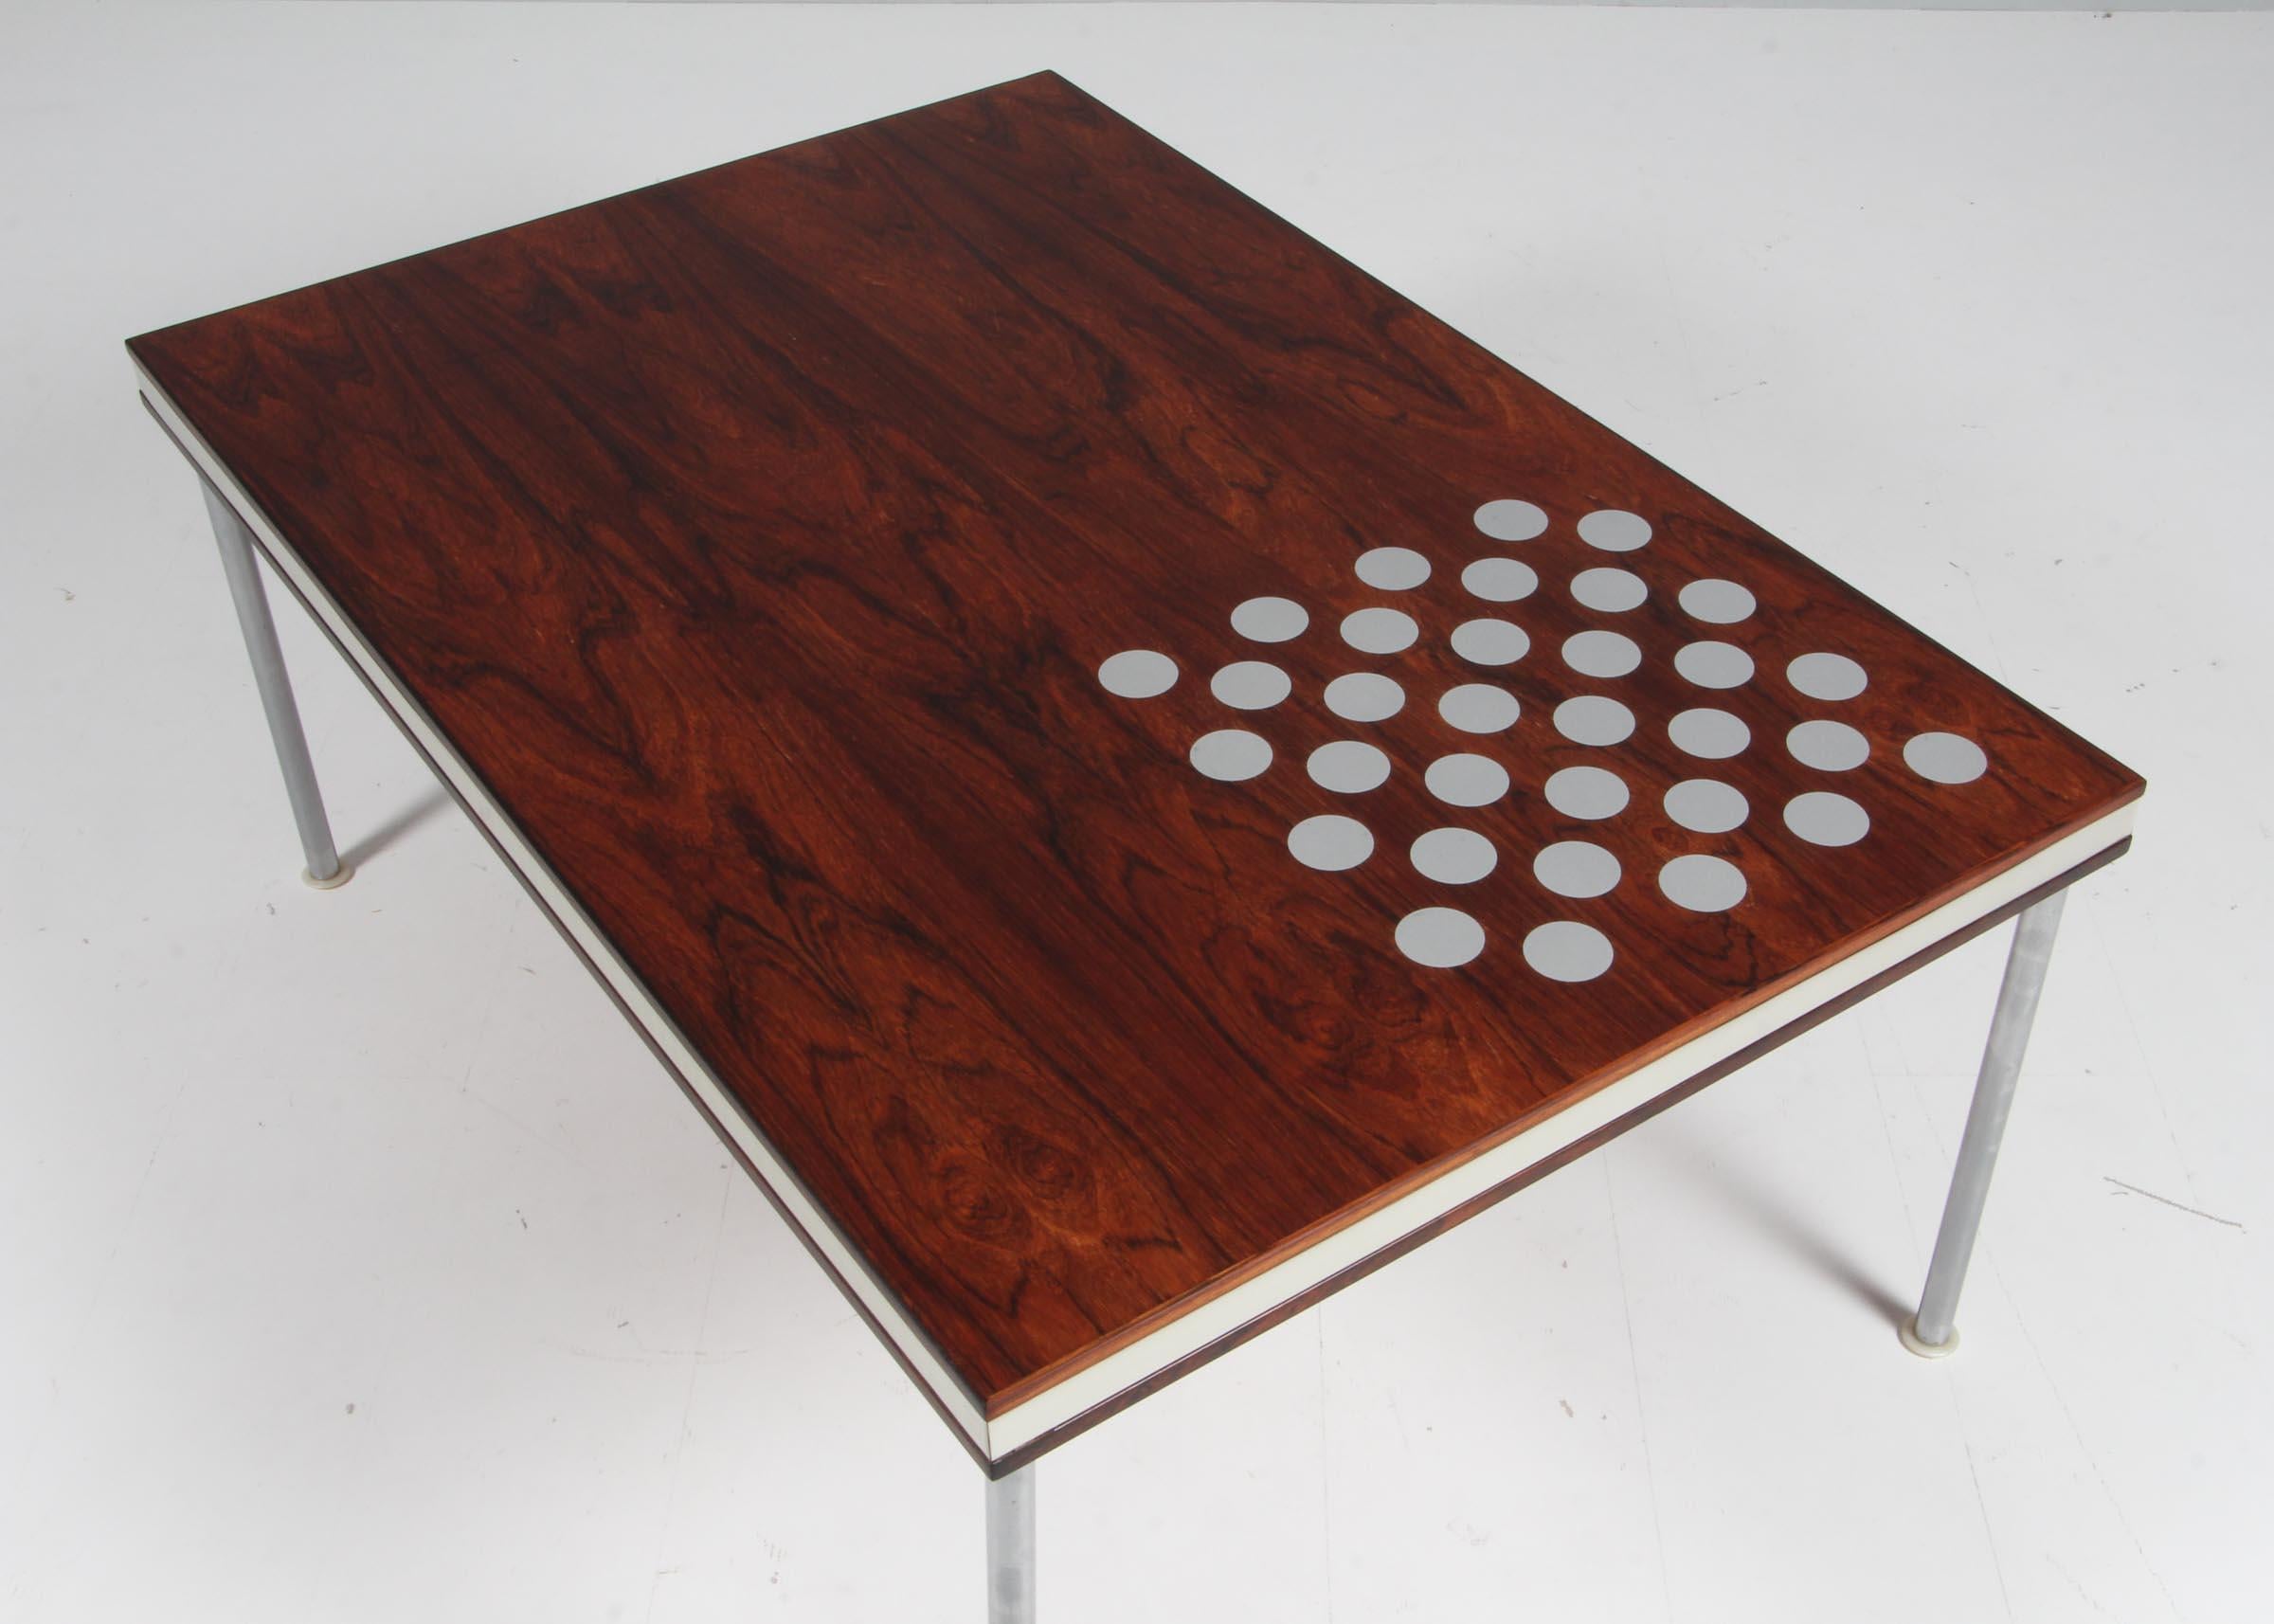 Poul Cadovius coffee table in veenered rosewood, steel details.

Made by France & Son.